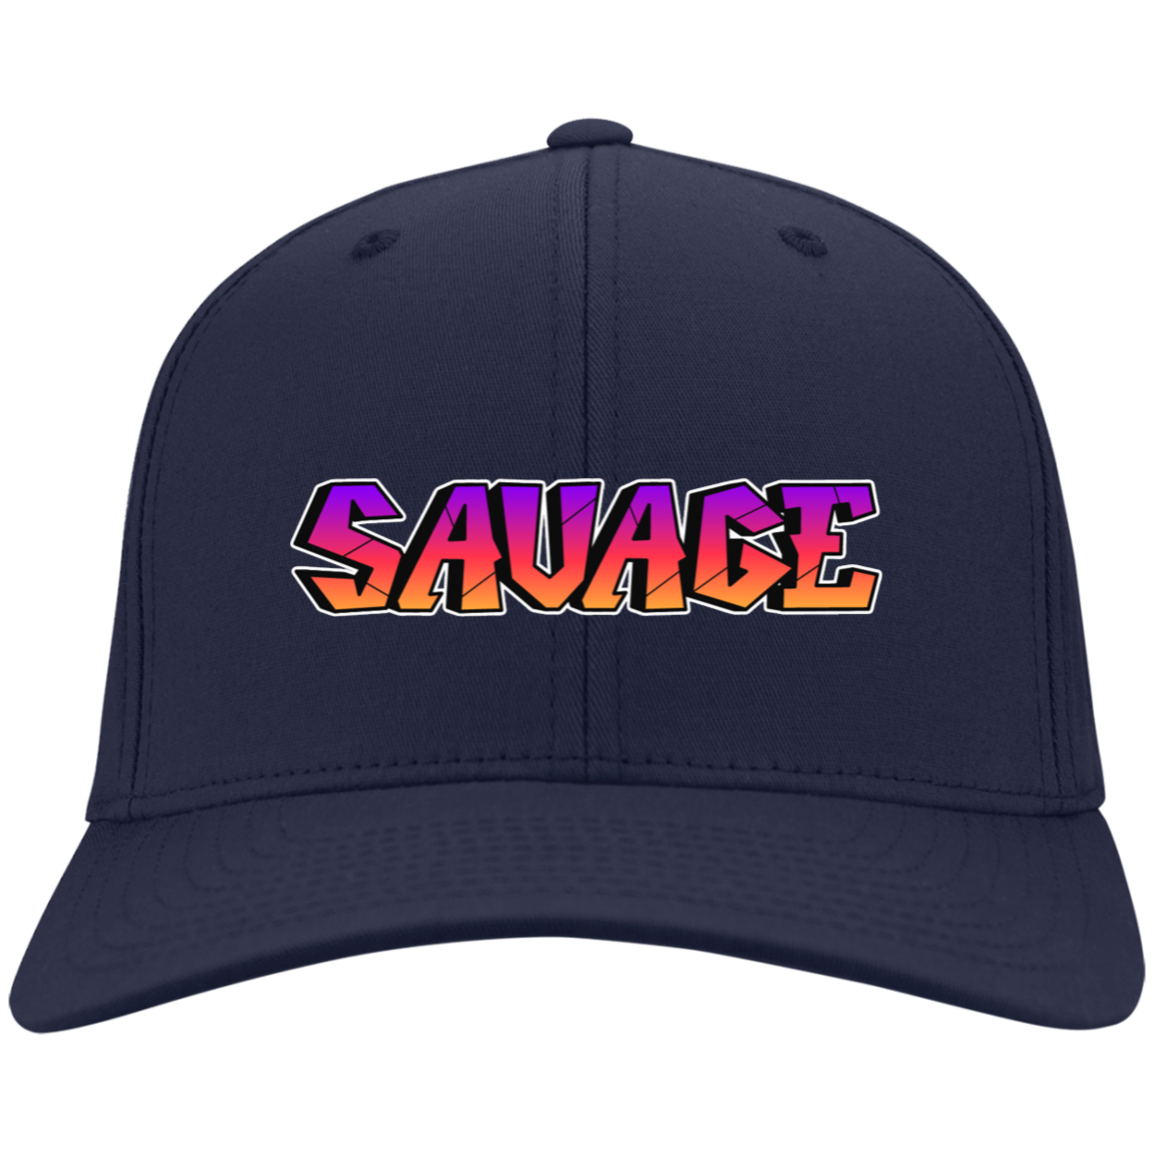 Savage Embroidered Twill Cap